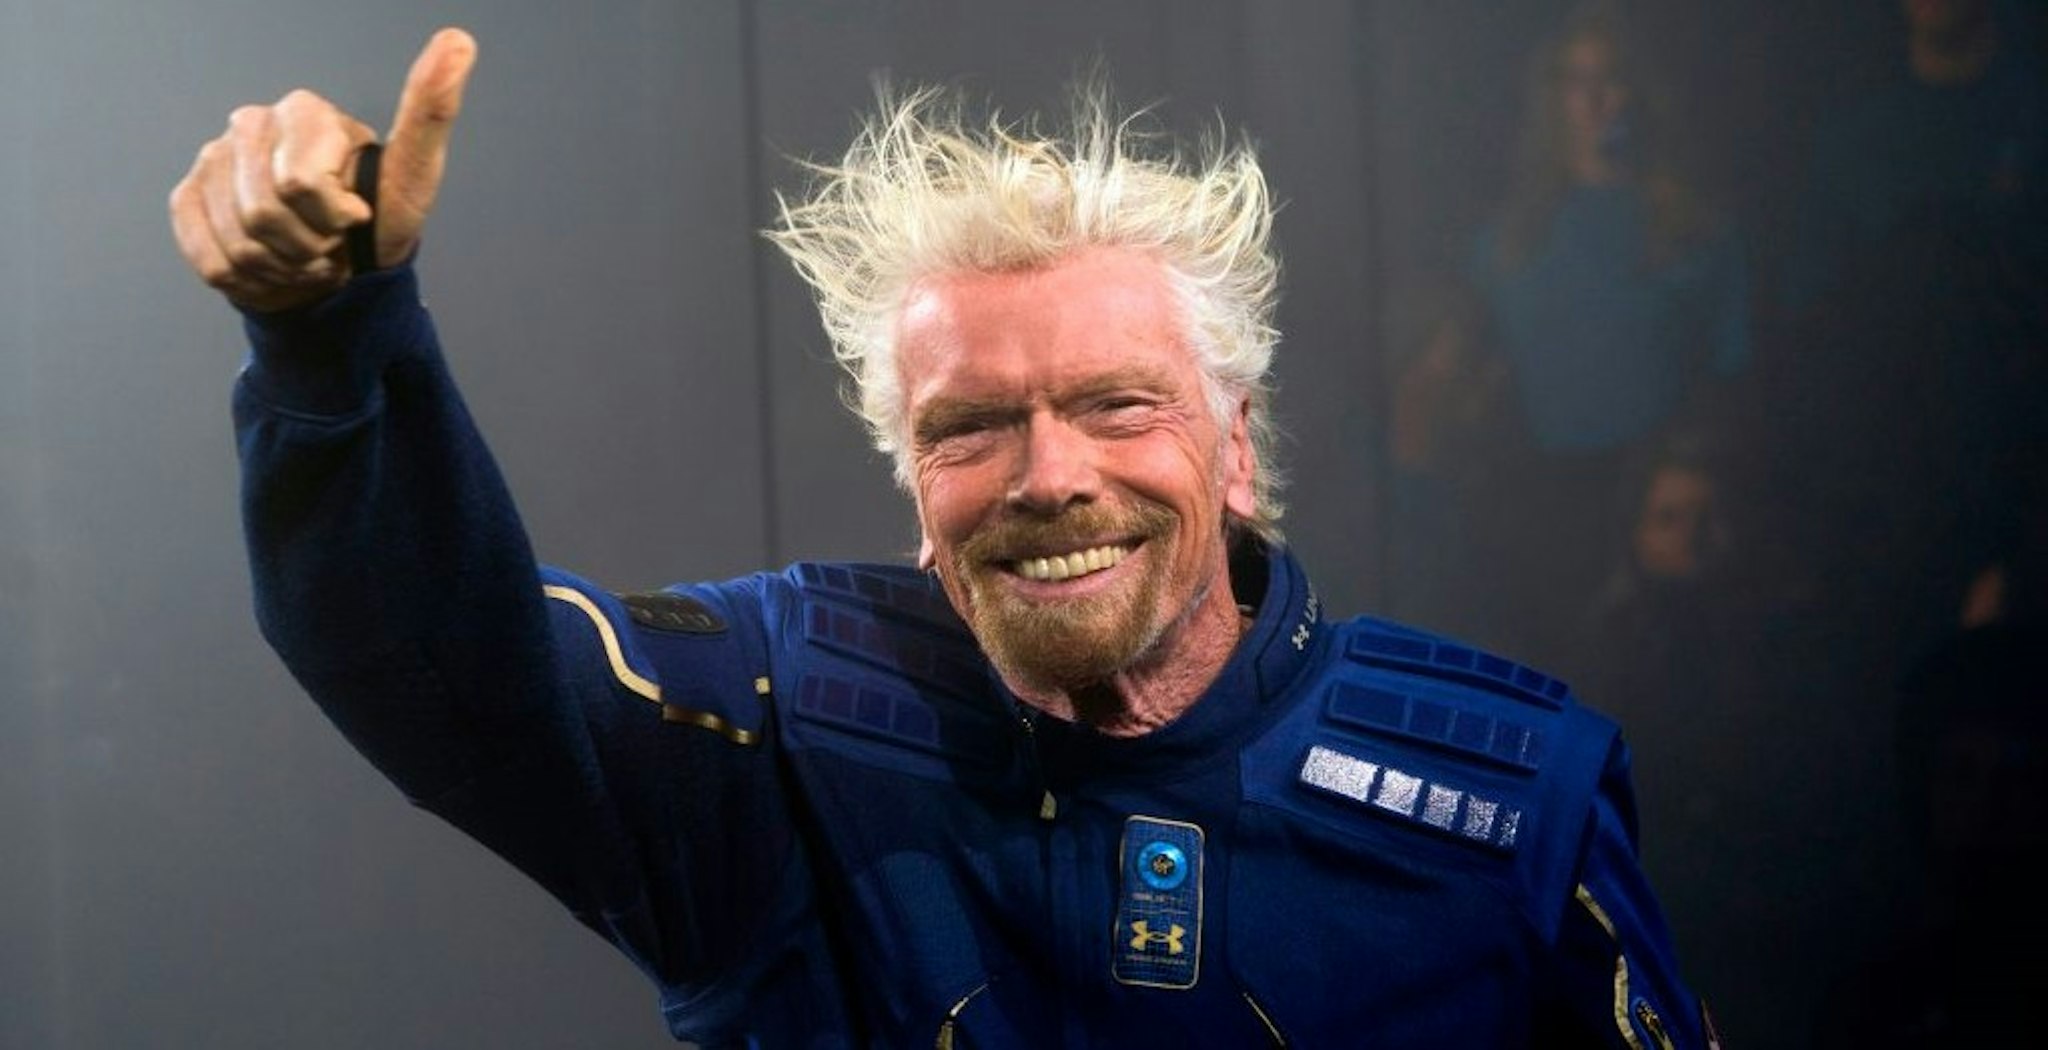 Virgin Galactic Founder Sir Richard Branson demonstrates a spacewear system, designed for Virgin Galactic astronauts, at an event October 16, 2019 in Yonkers, New York. - At the event Virgin Galactic and Under Armour unveiled the worlds first exclusive spacewear system for private astronauts. (Photo by Don Emmert / AFP) (Photo by